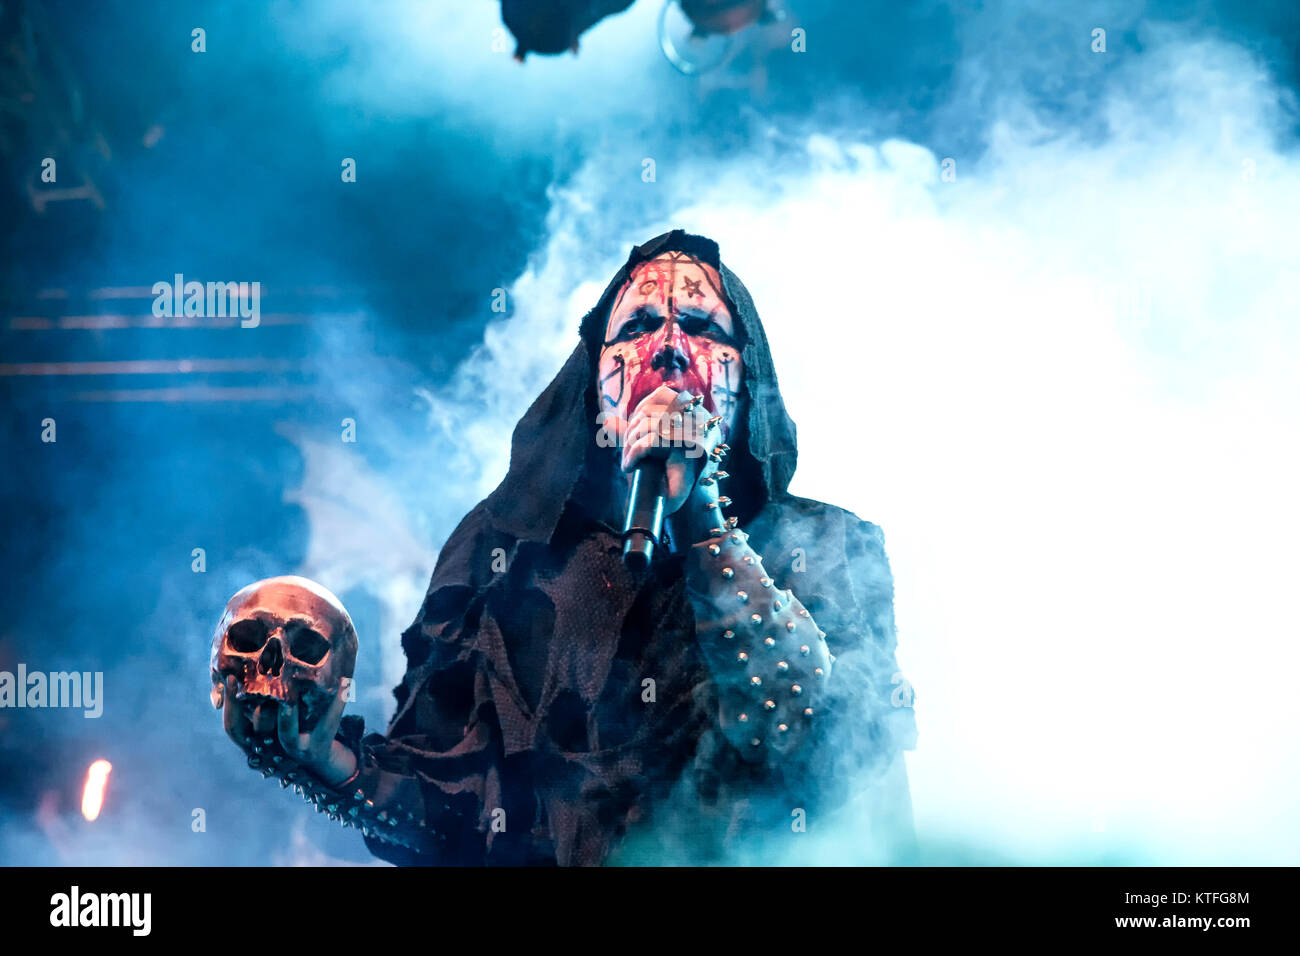 The Norwegian black metal band Mayhem performs a live concert at the Norwegian music festival Øyafestivalen 2014. Here vocalist Attila Csihar is seen live on stage. Norway, 08/08 2014. Stock Photo